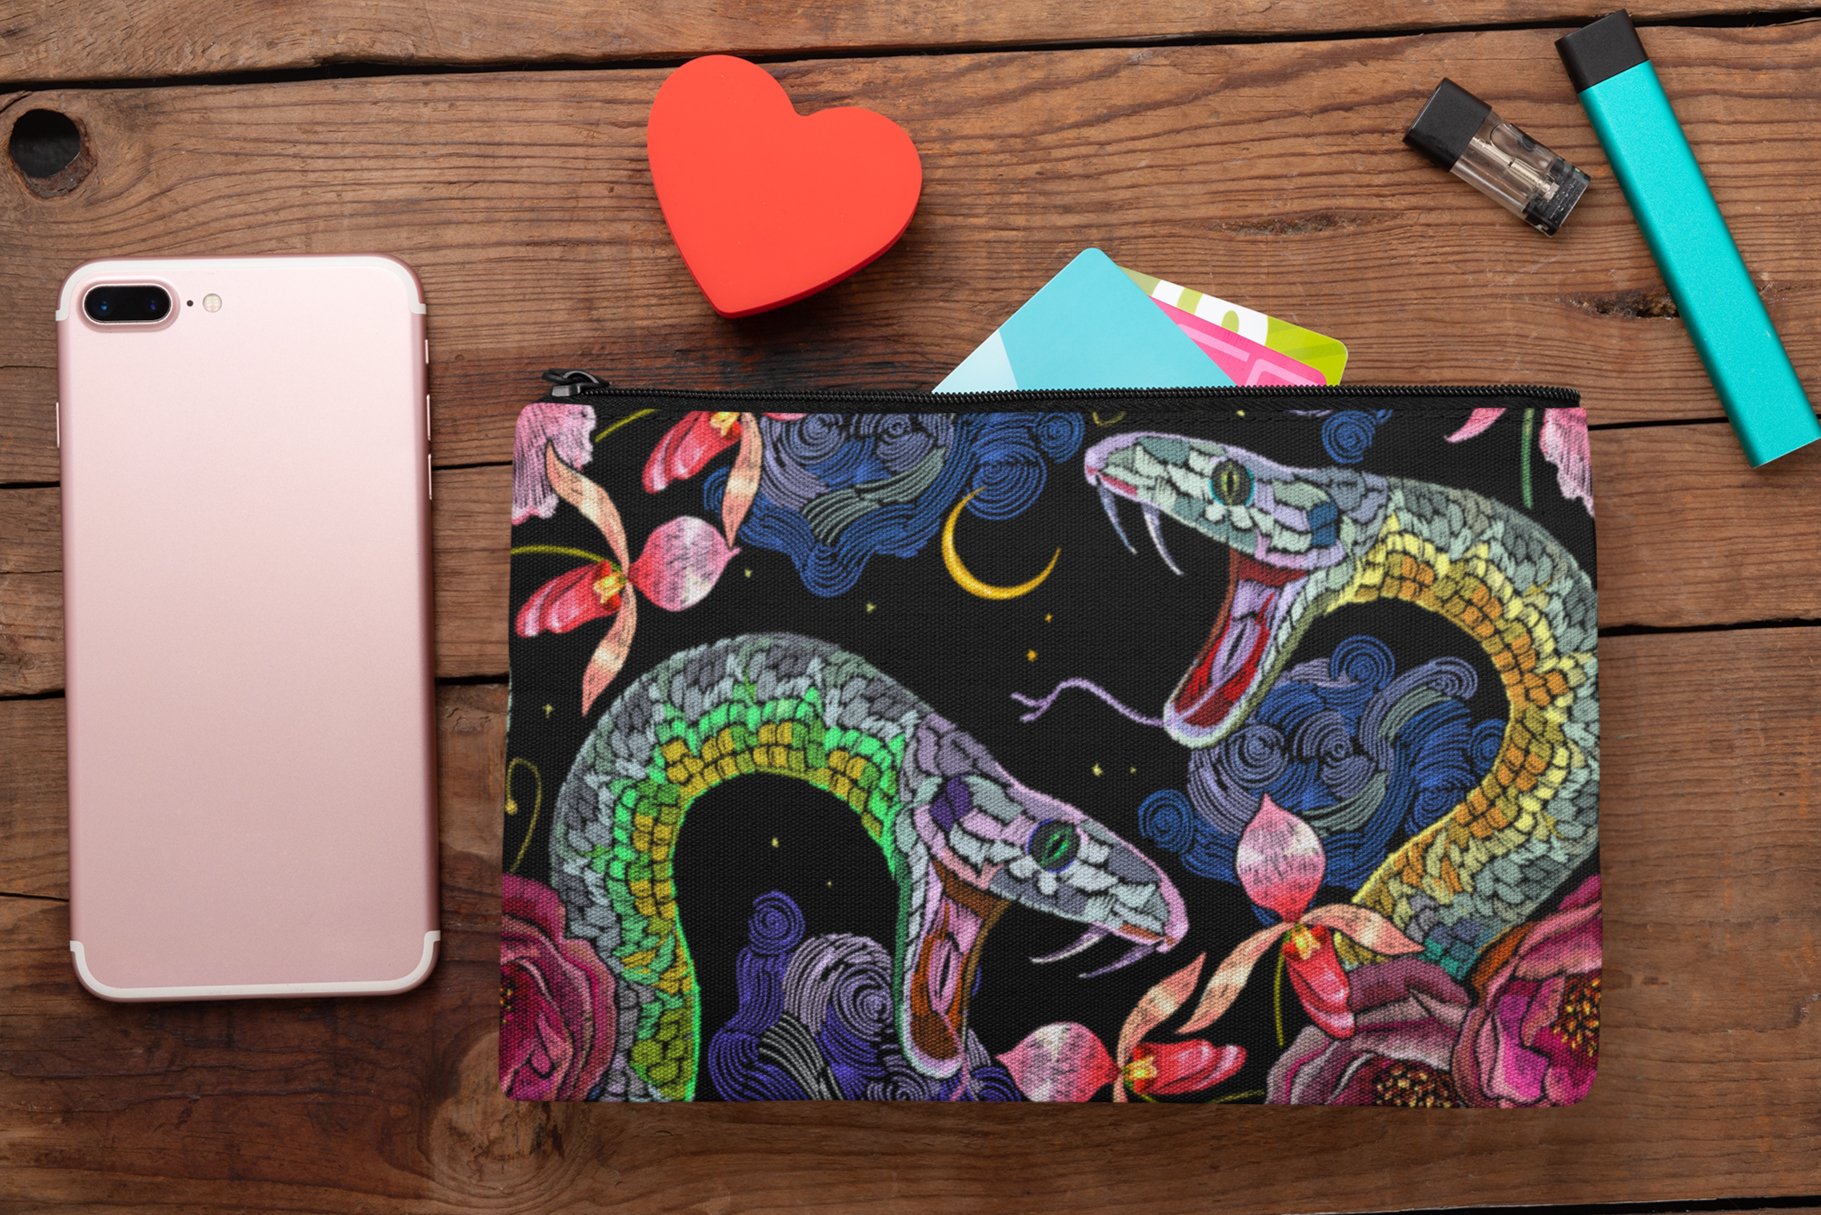 Cool colorful illustration for a cosmetic bag.